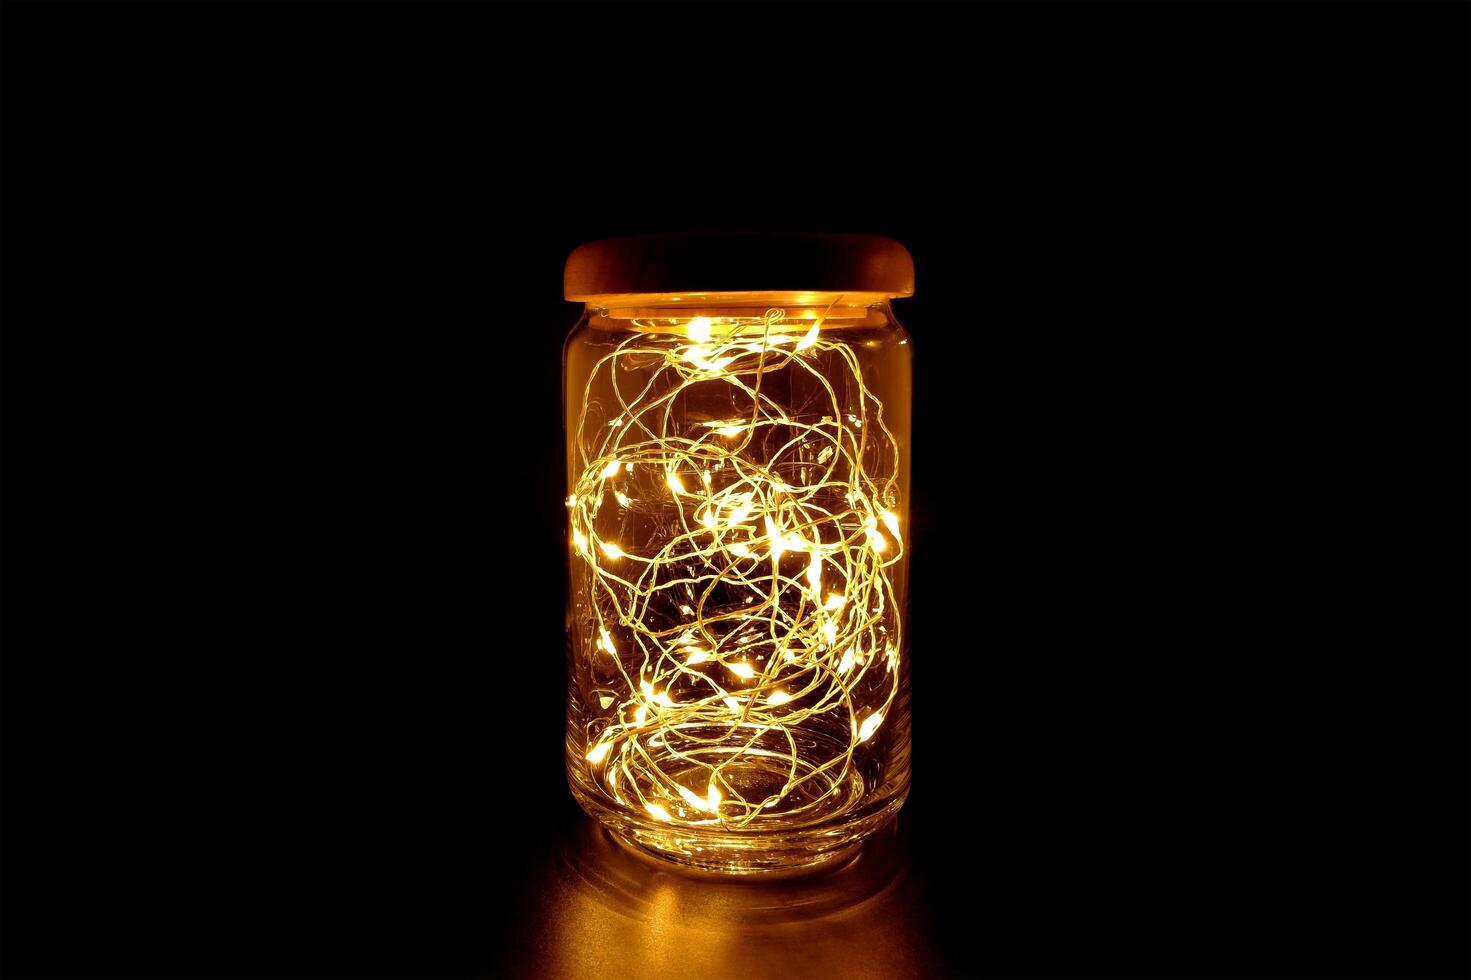 Fairy Light in a Glass Jar with Wooden Lid, in the Dark. Low-Key Photography. photo